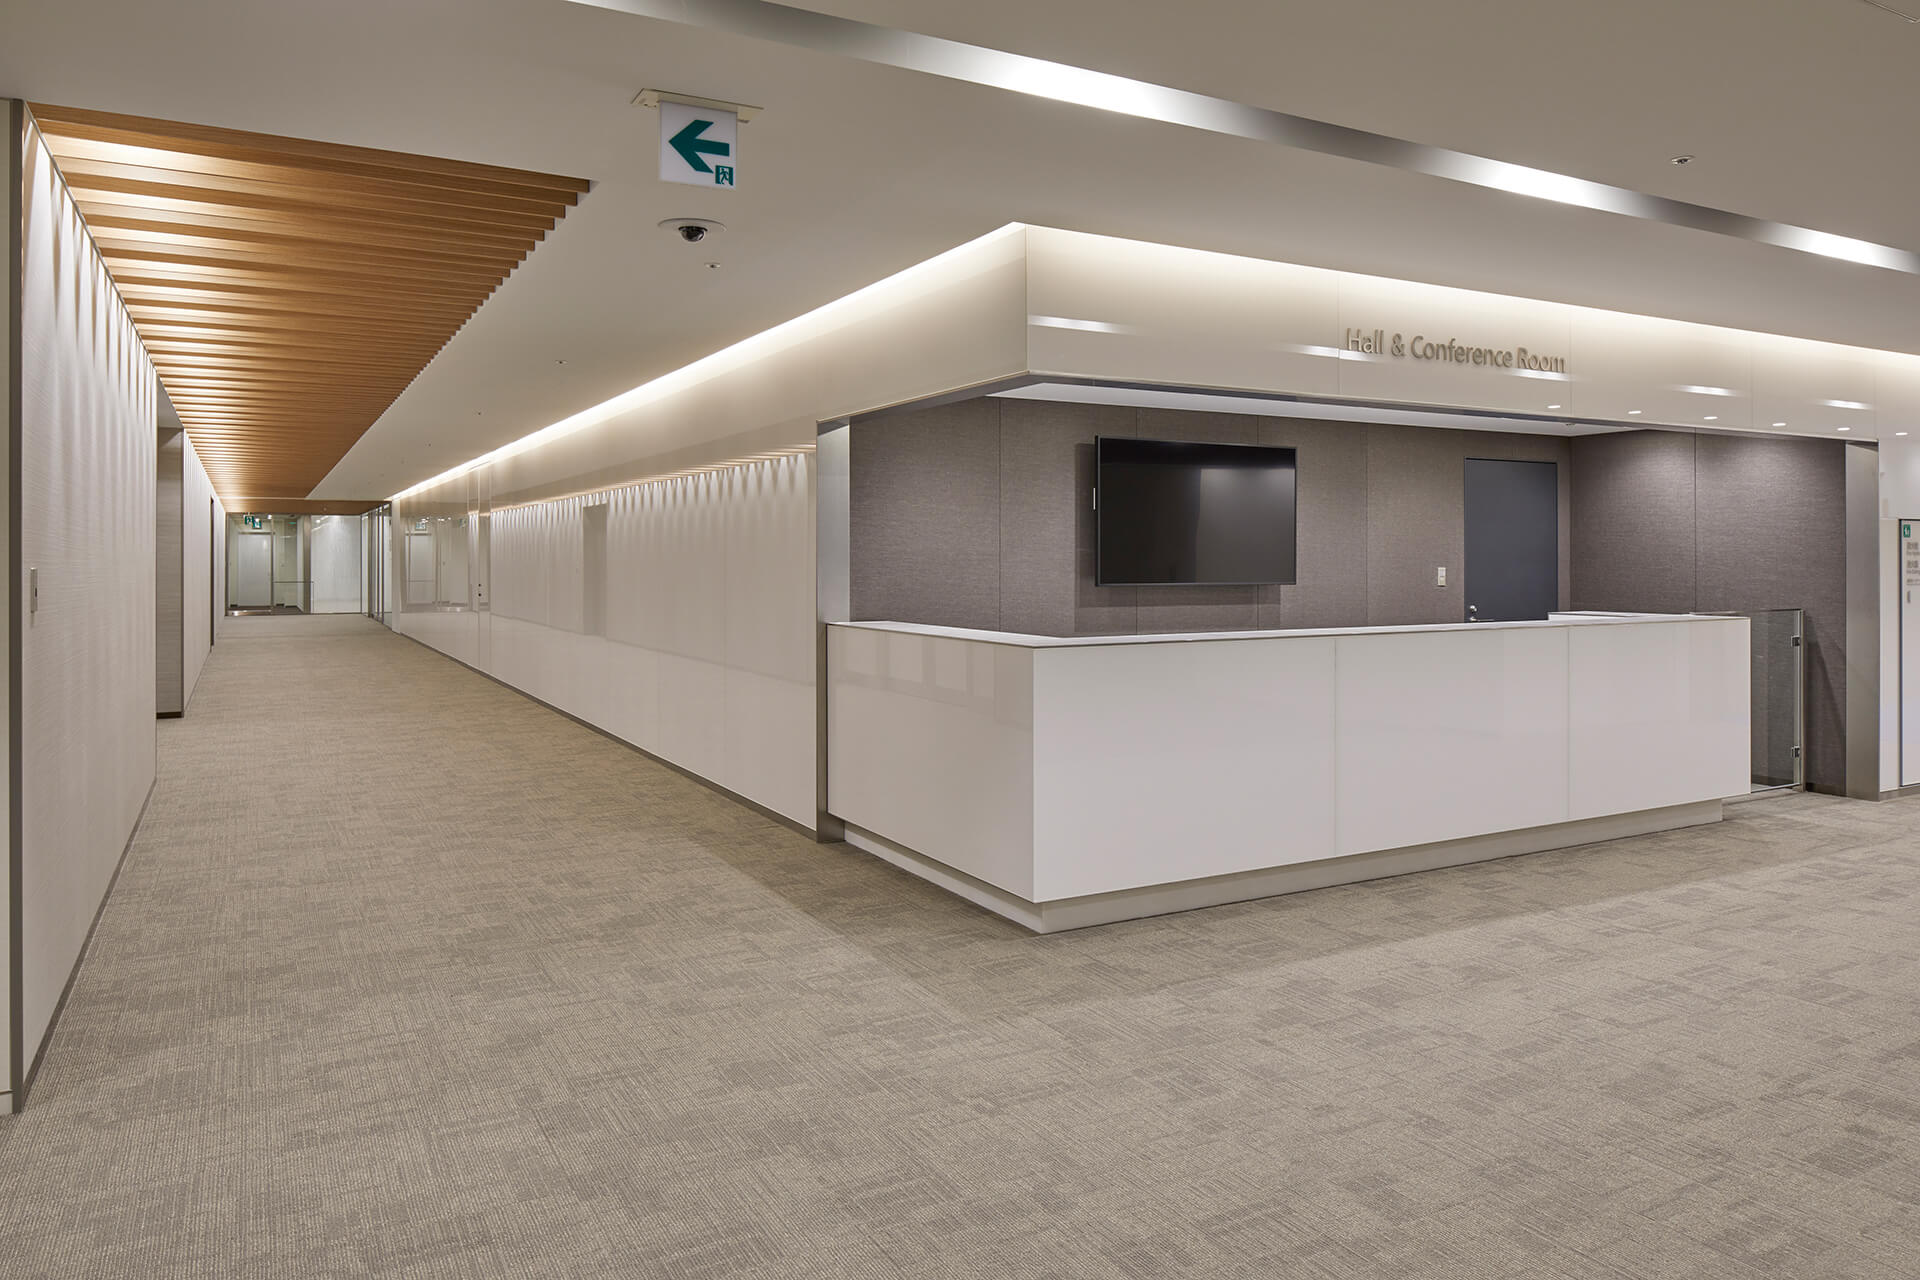 5th floor: Reception for hall and meeting rooms